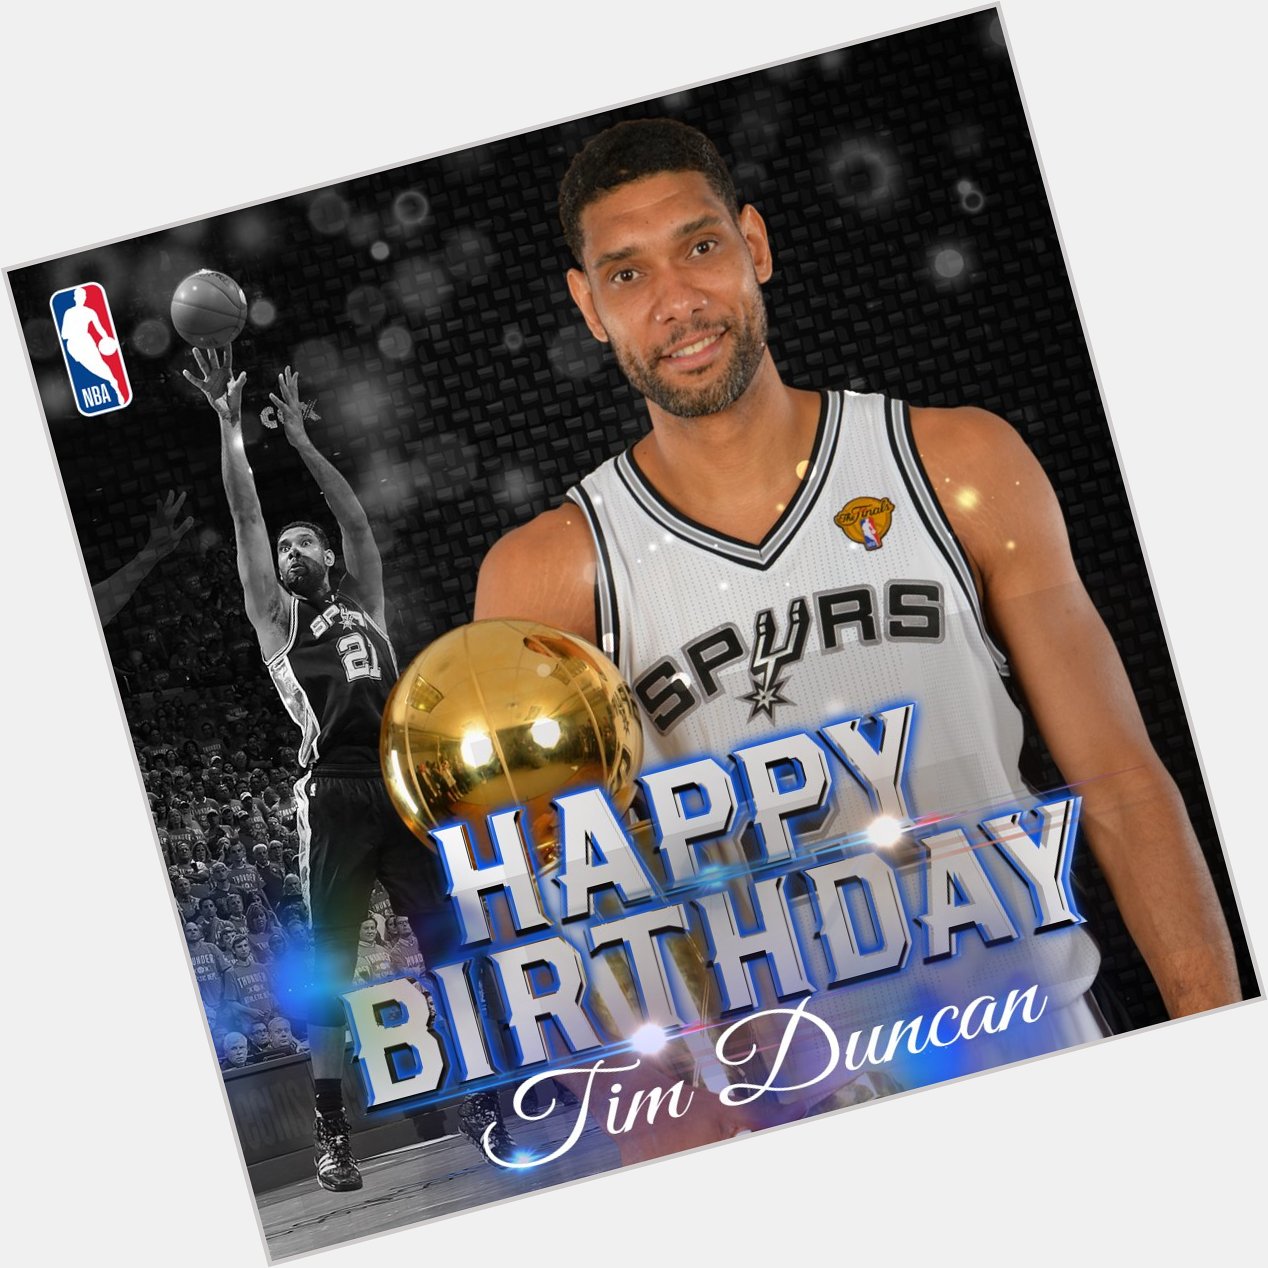 Happy Birthday to 5 time NBA champ and 1 5 time NBA All-Star, former player Tim Duncan  